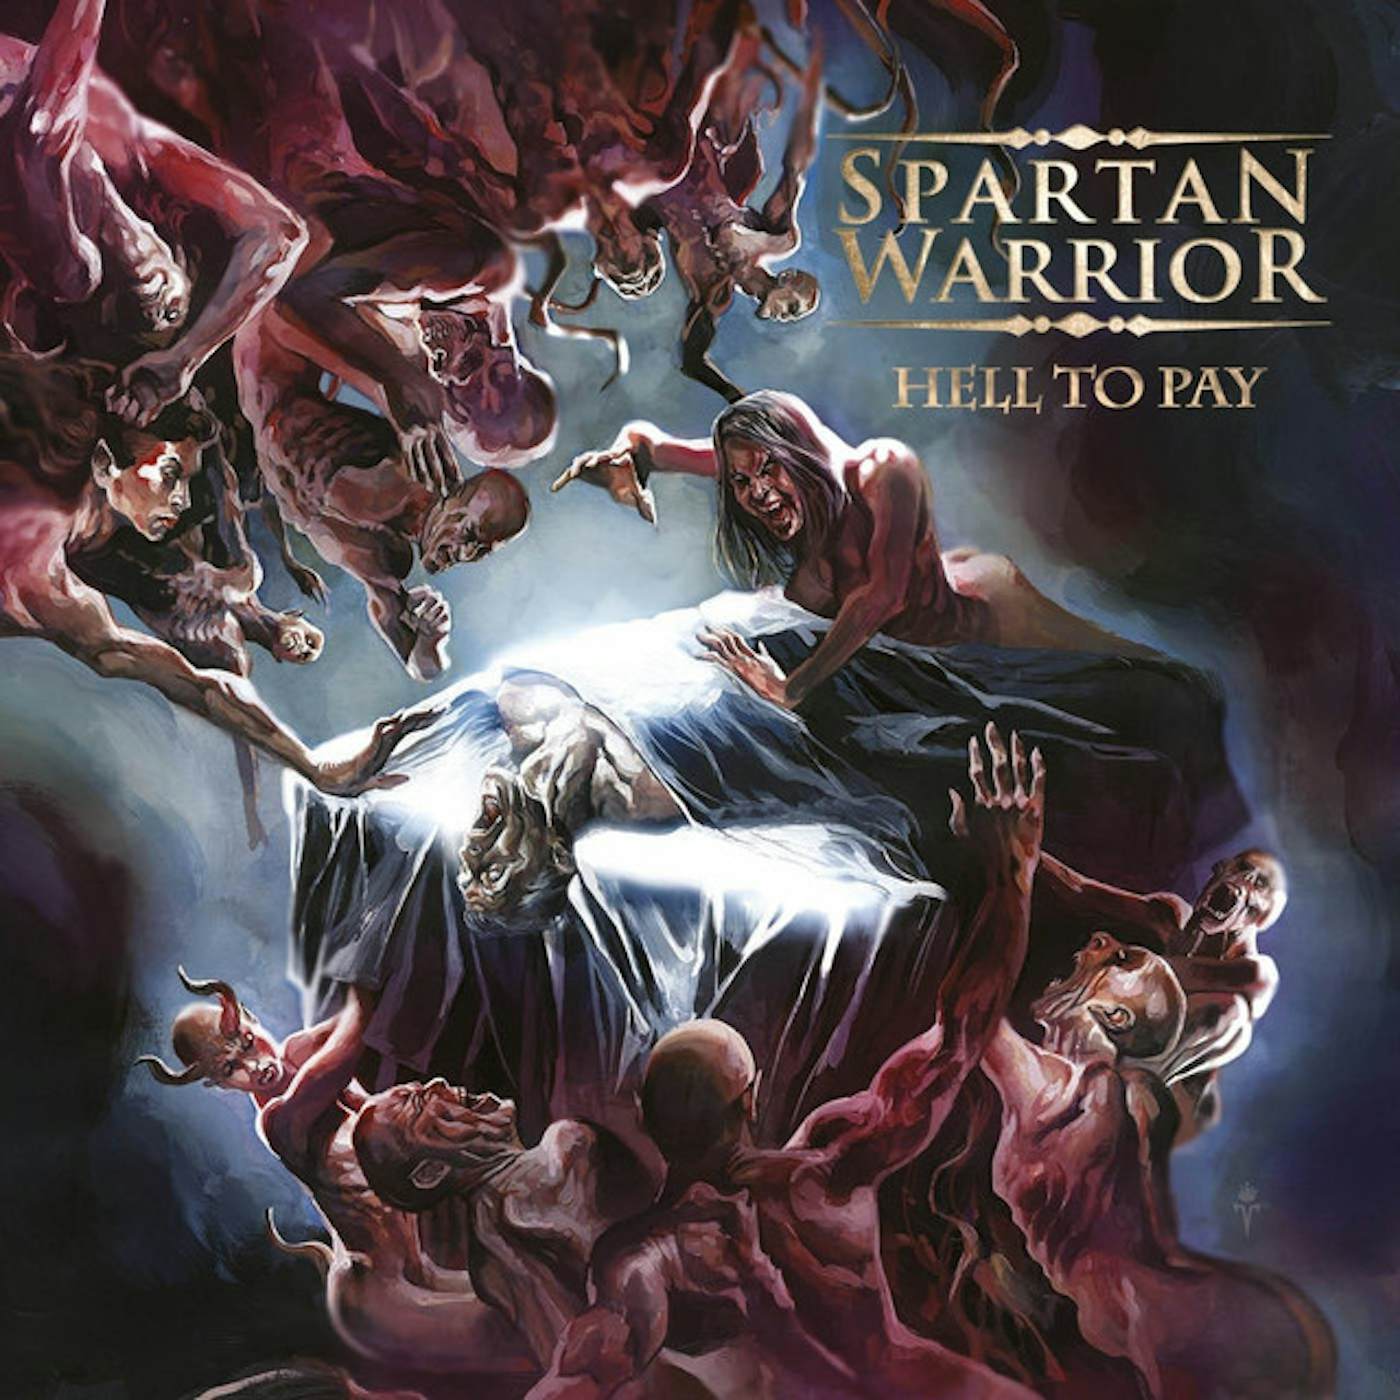 Spartan Warrior Hell to Pay Vinyl Record